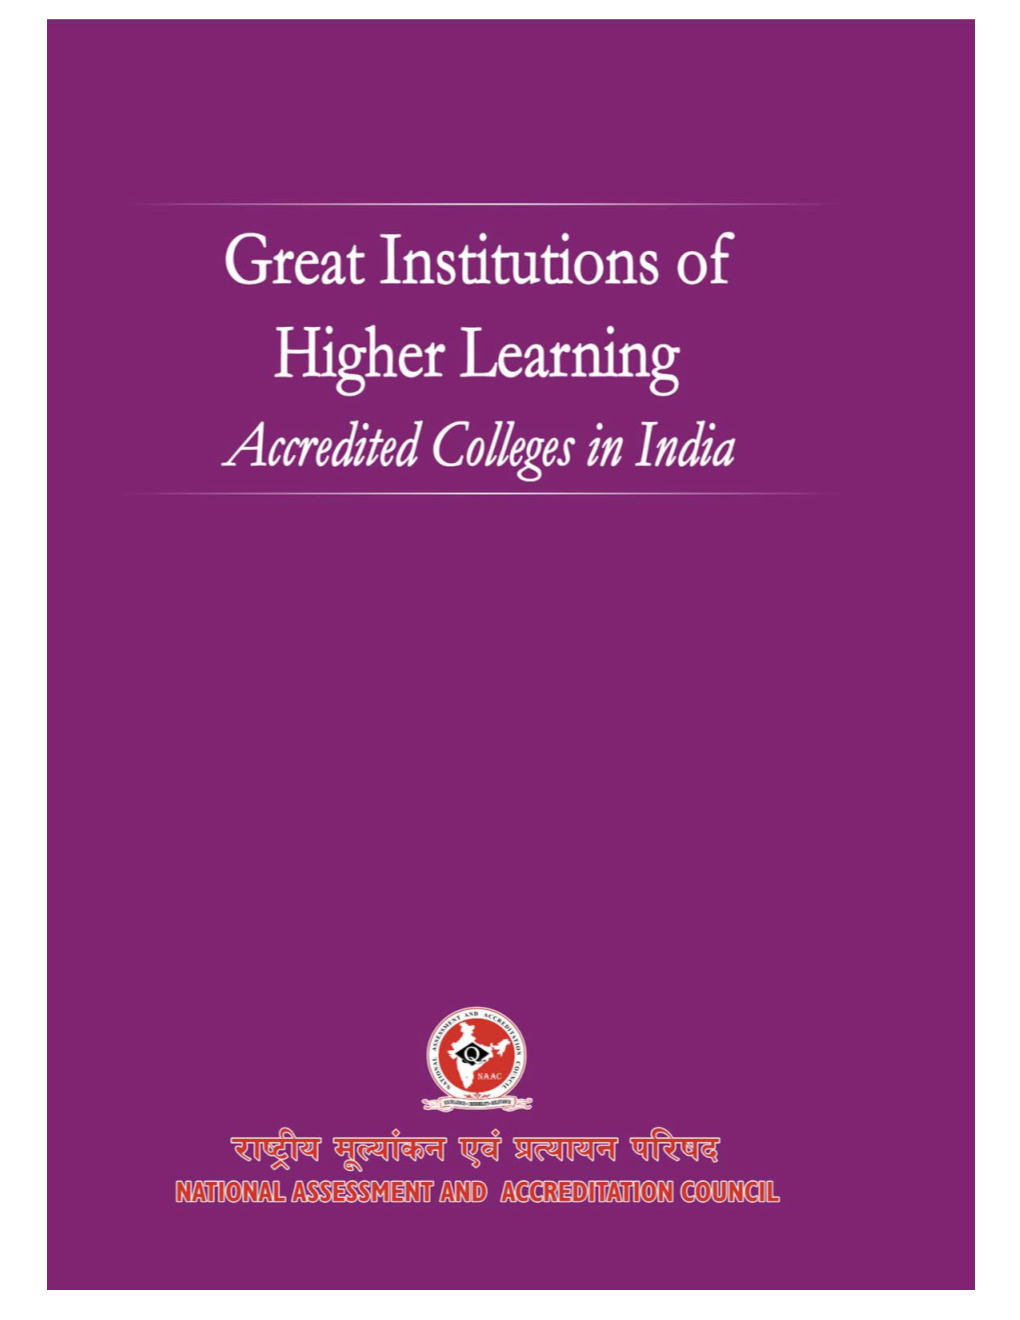 Colleges in India (Volume I, 2002-2004) Series on Great Institutions of Higher Learning Accredited Colleges in India (Volume I, 2002-2004)